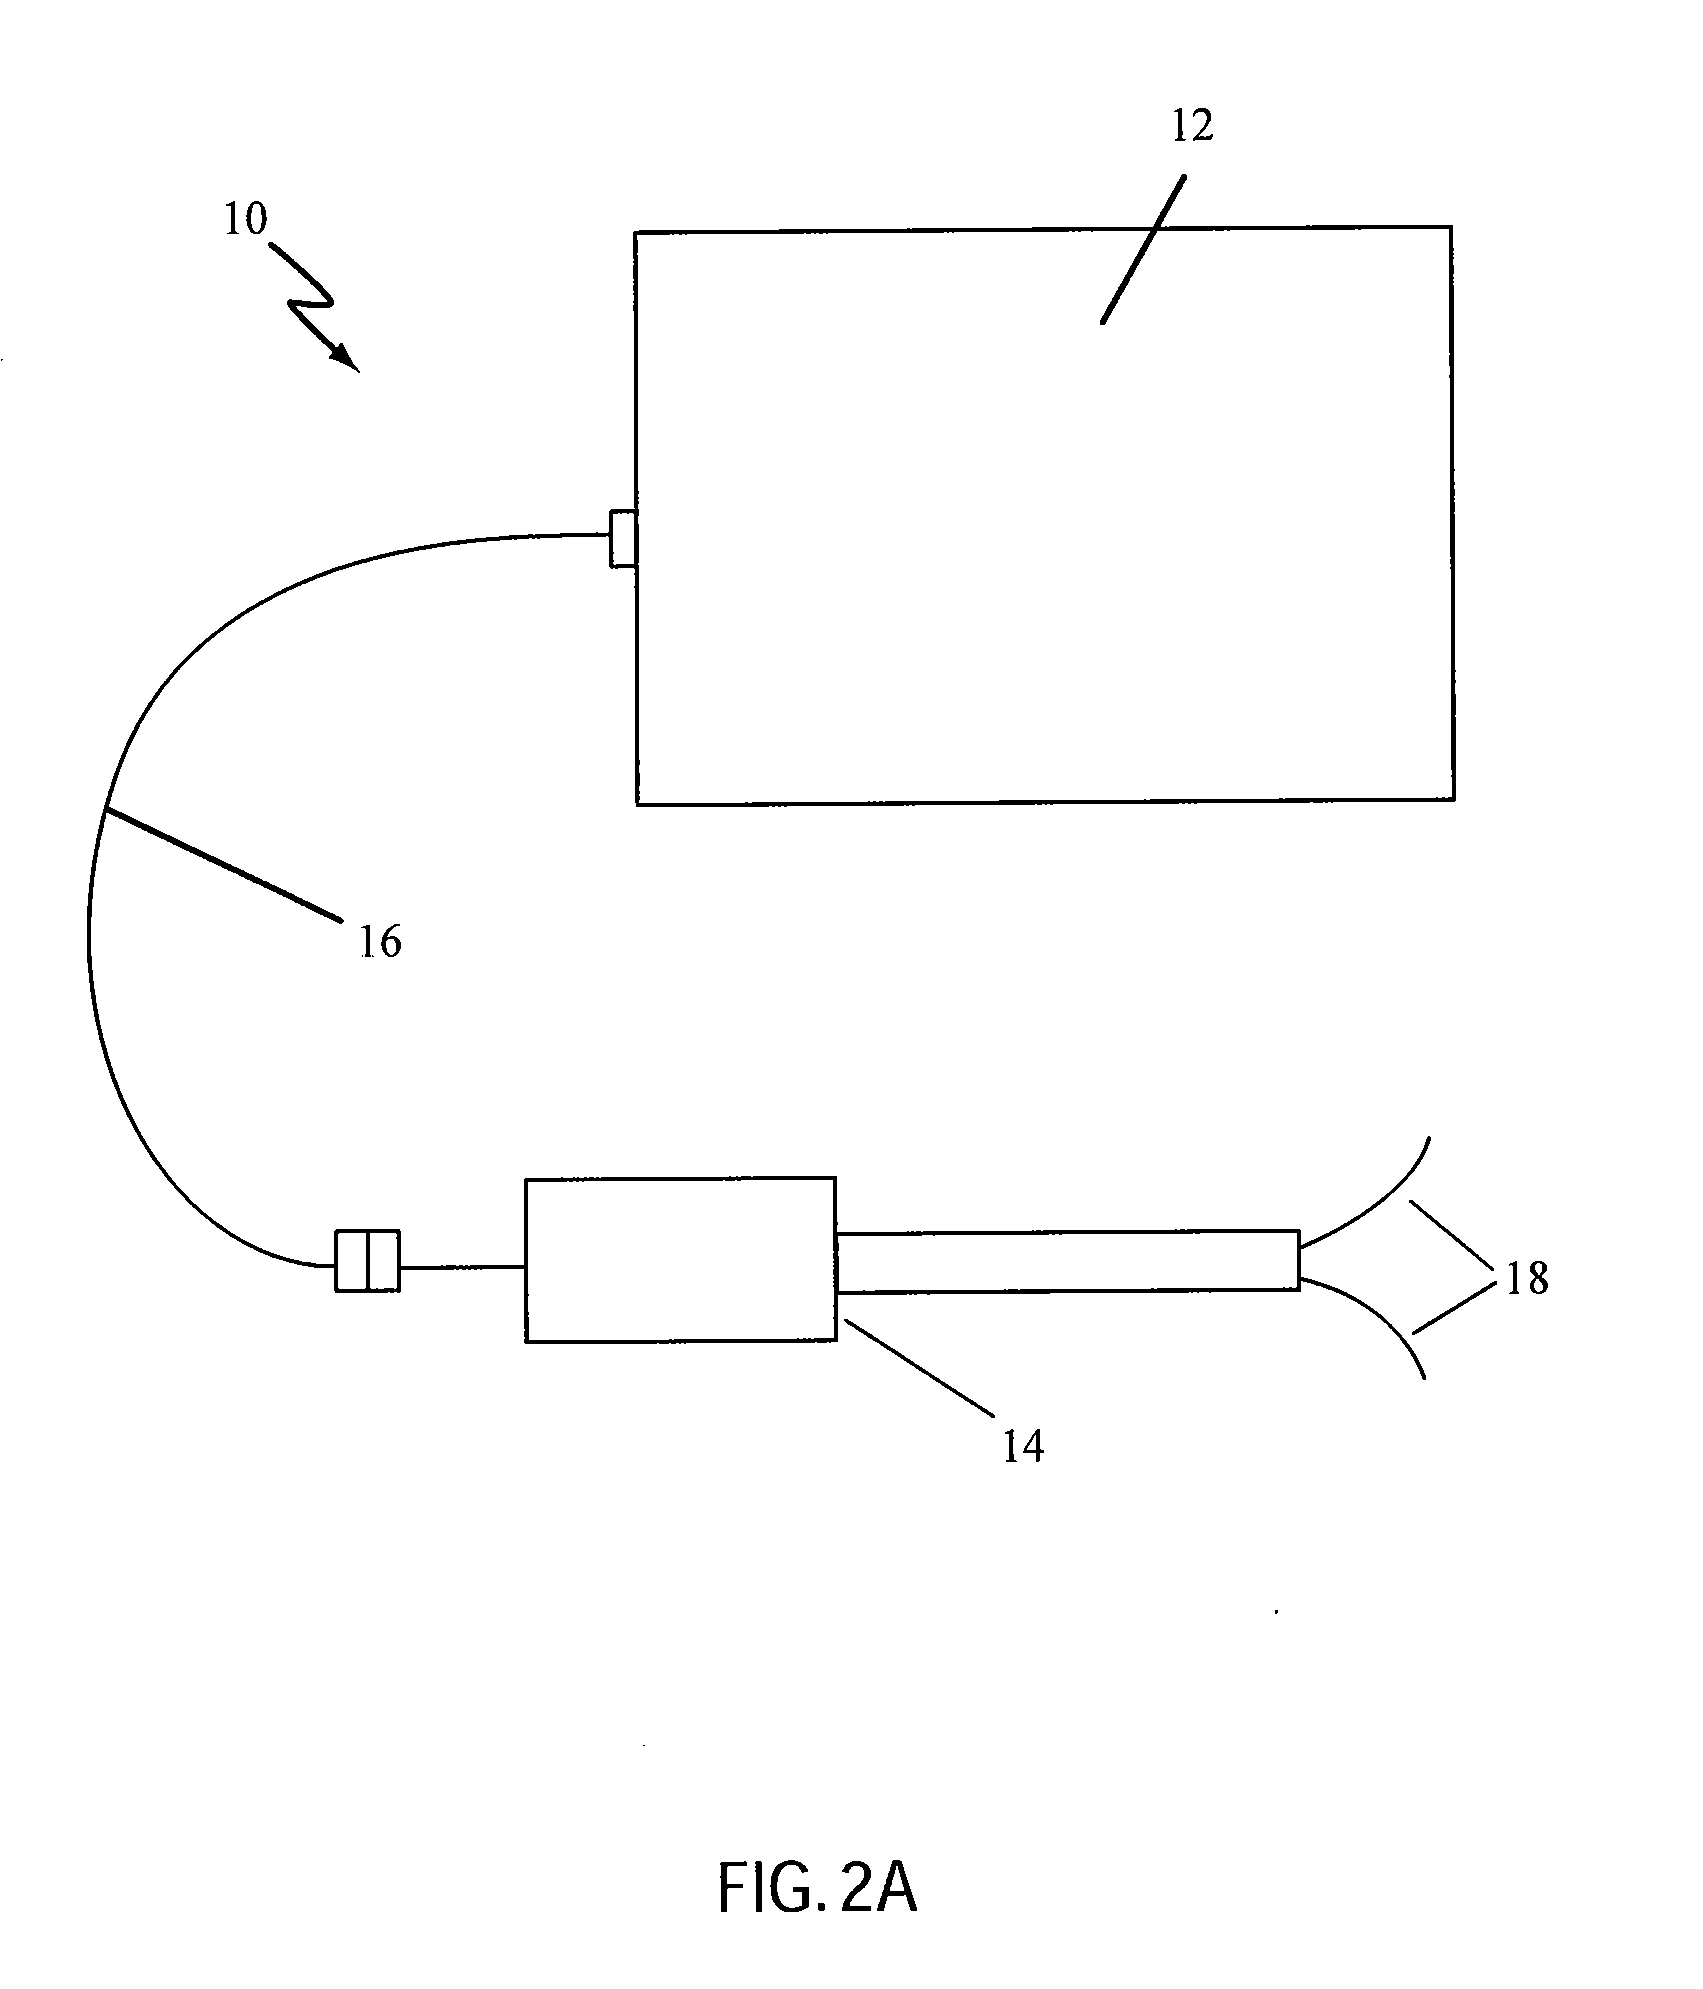 Non-Thermal Ablation System for Treating Tissue